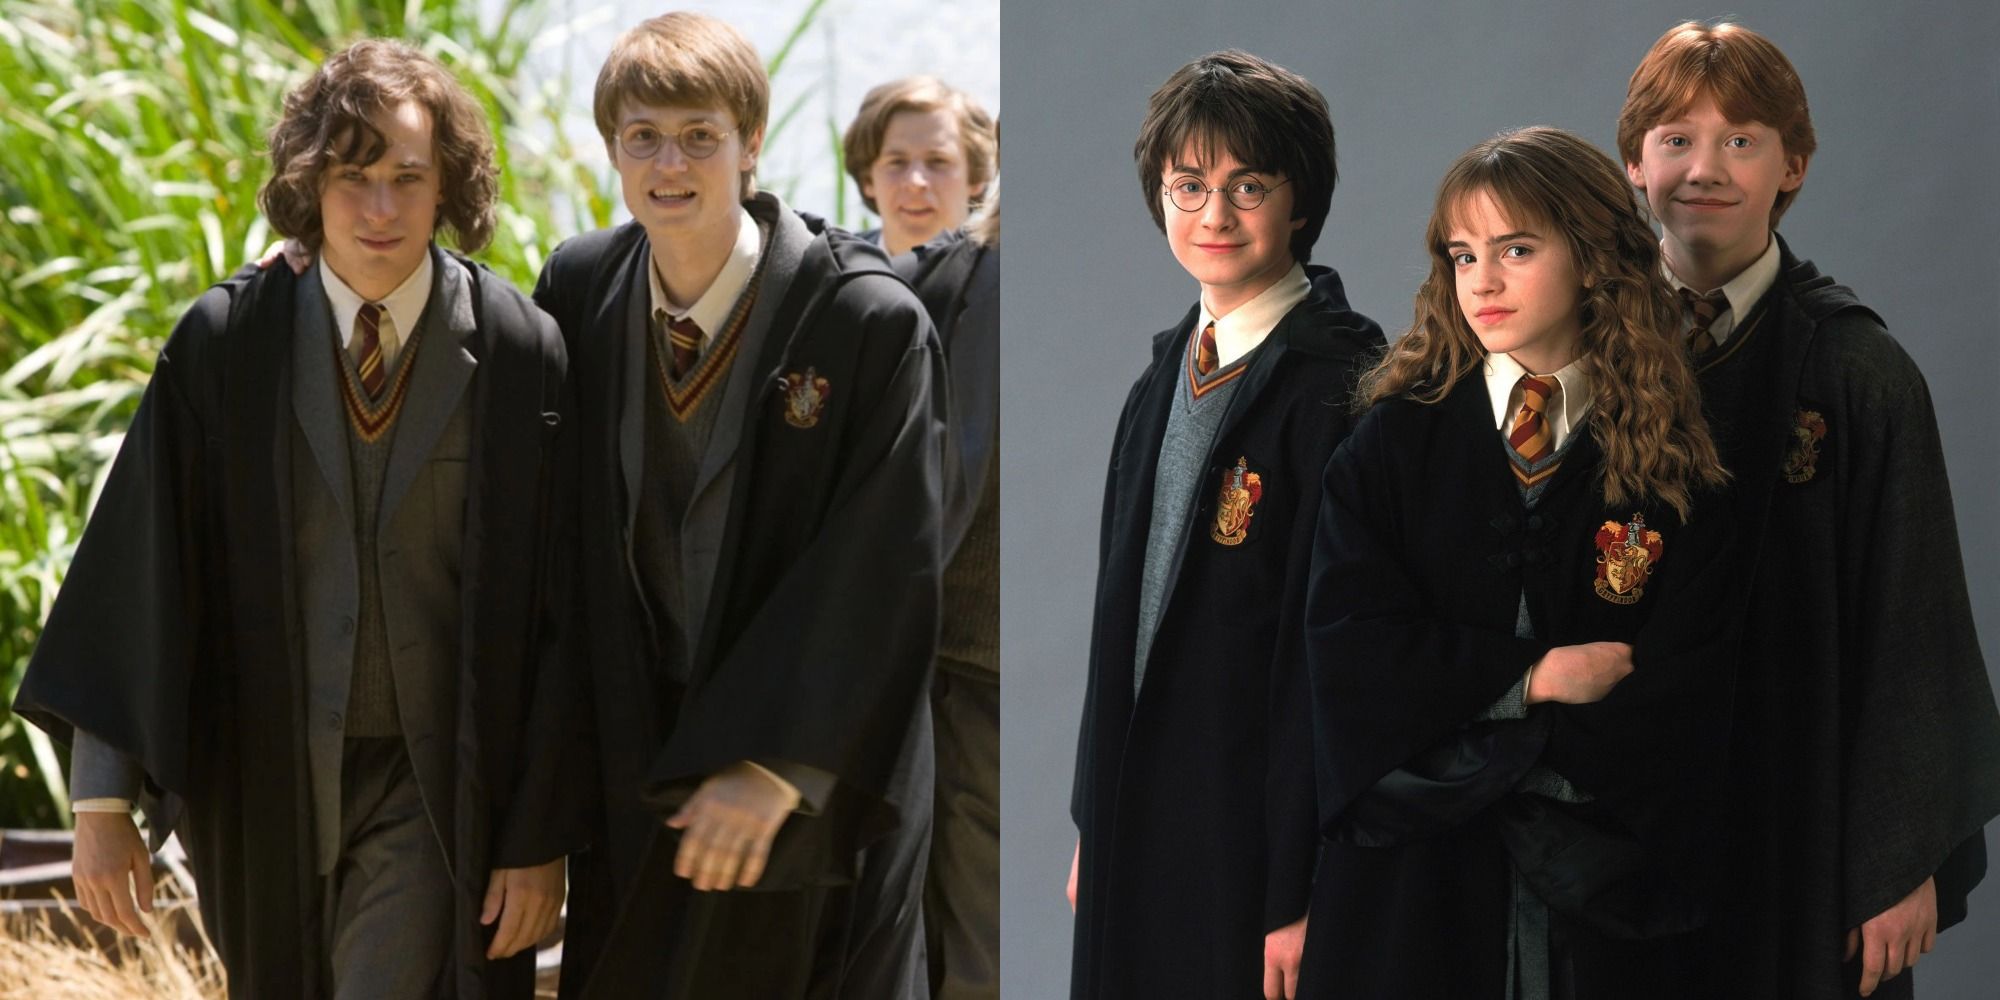 Harry Potter Polyamorous Relationships — Sirius, James, Remus, Harry, Hermione, Ron